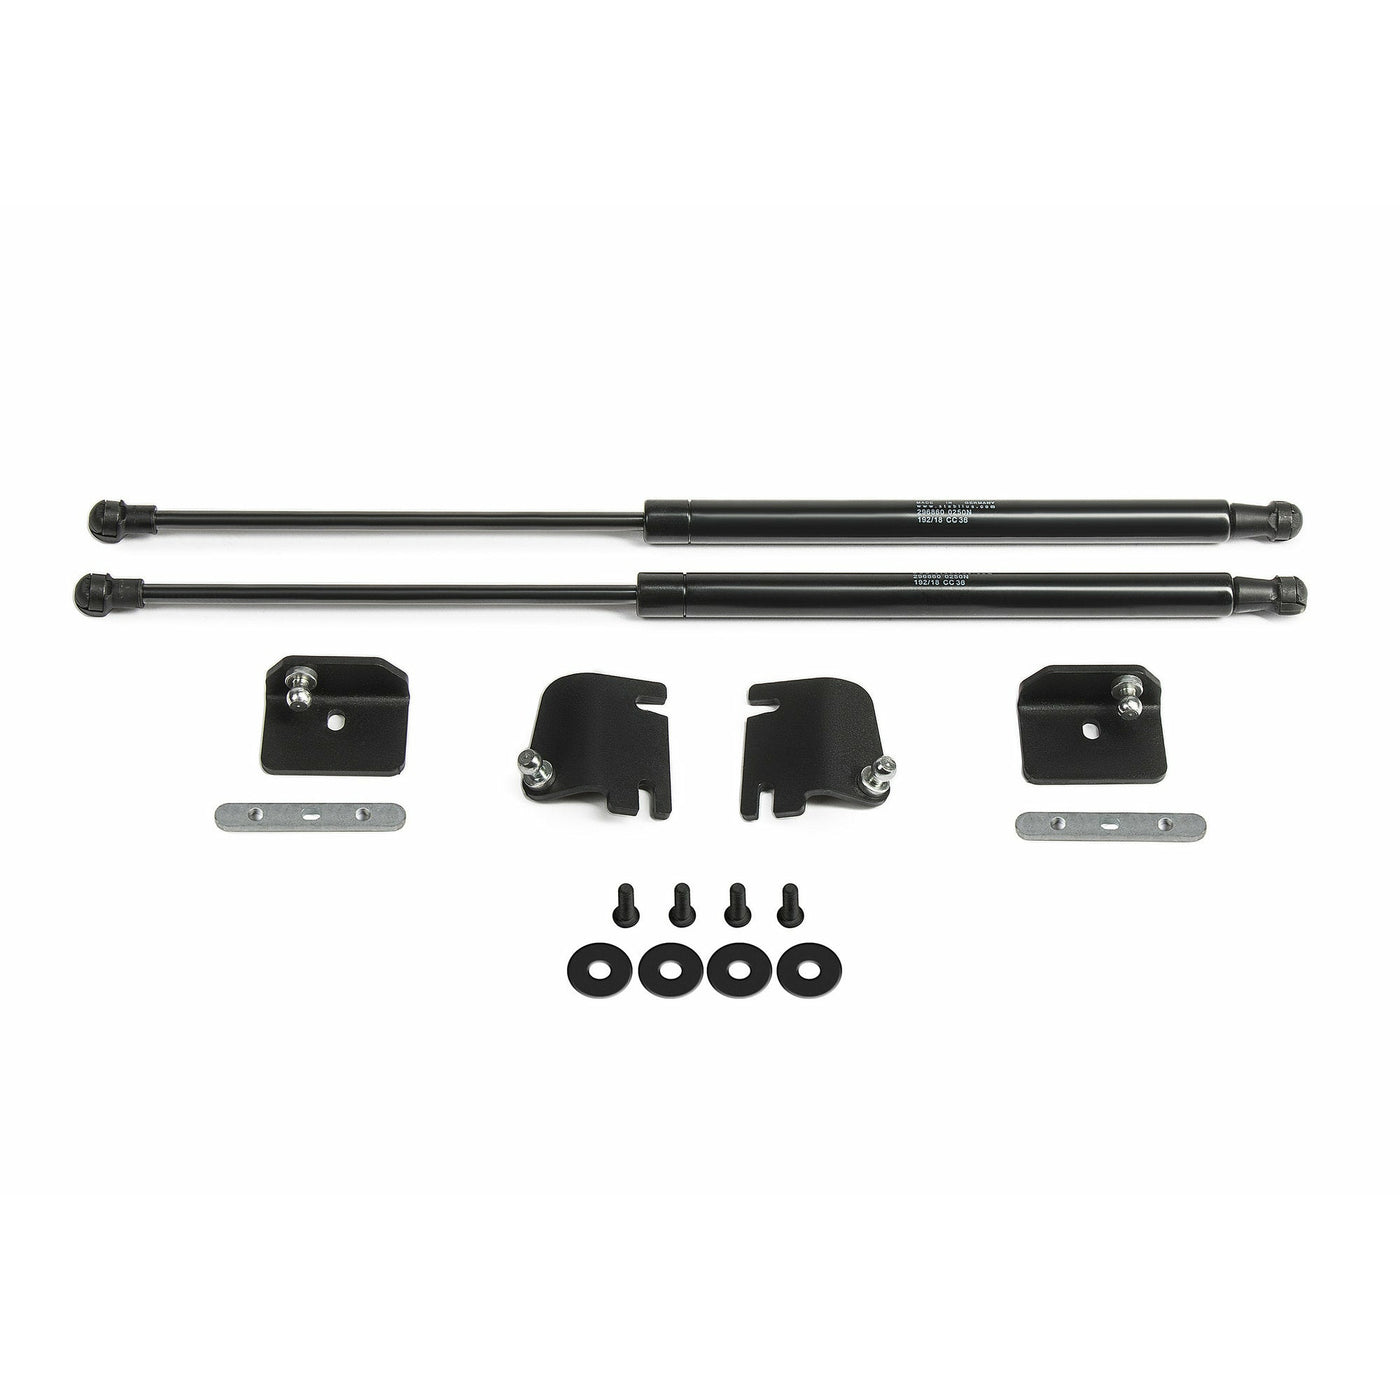 Rival 4x4 Hood Lift Kit for 07-22 Jeep Wrangler JK JL and JT with Factory Hood